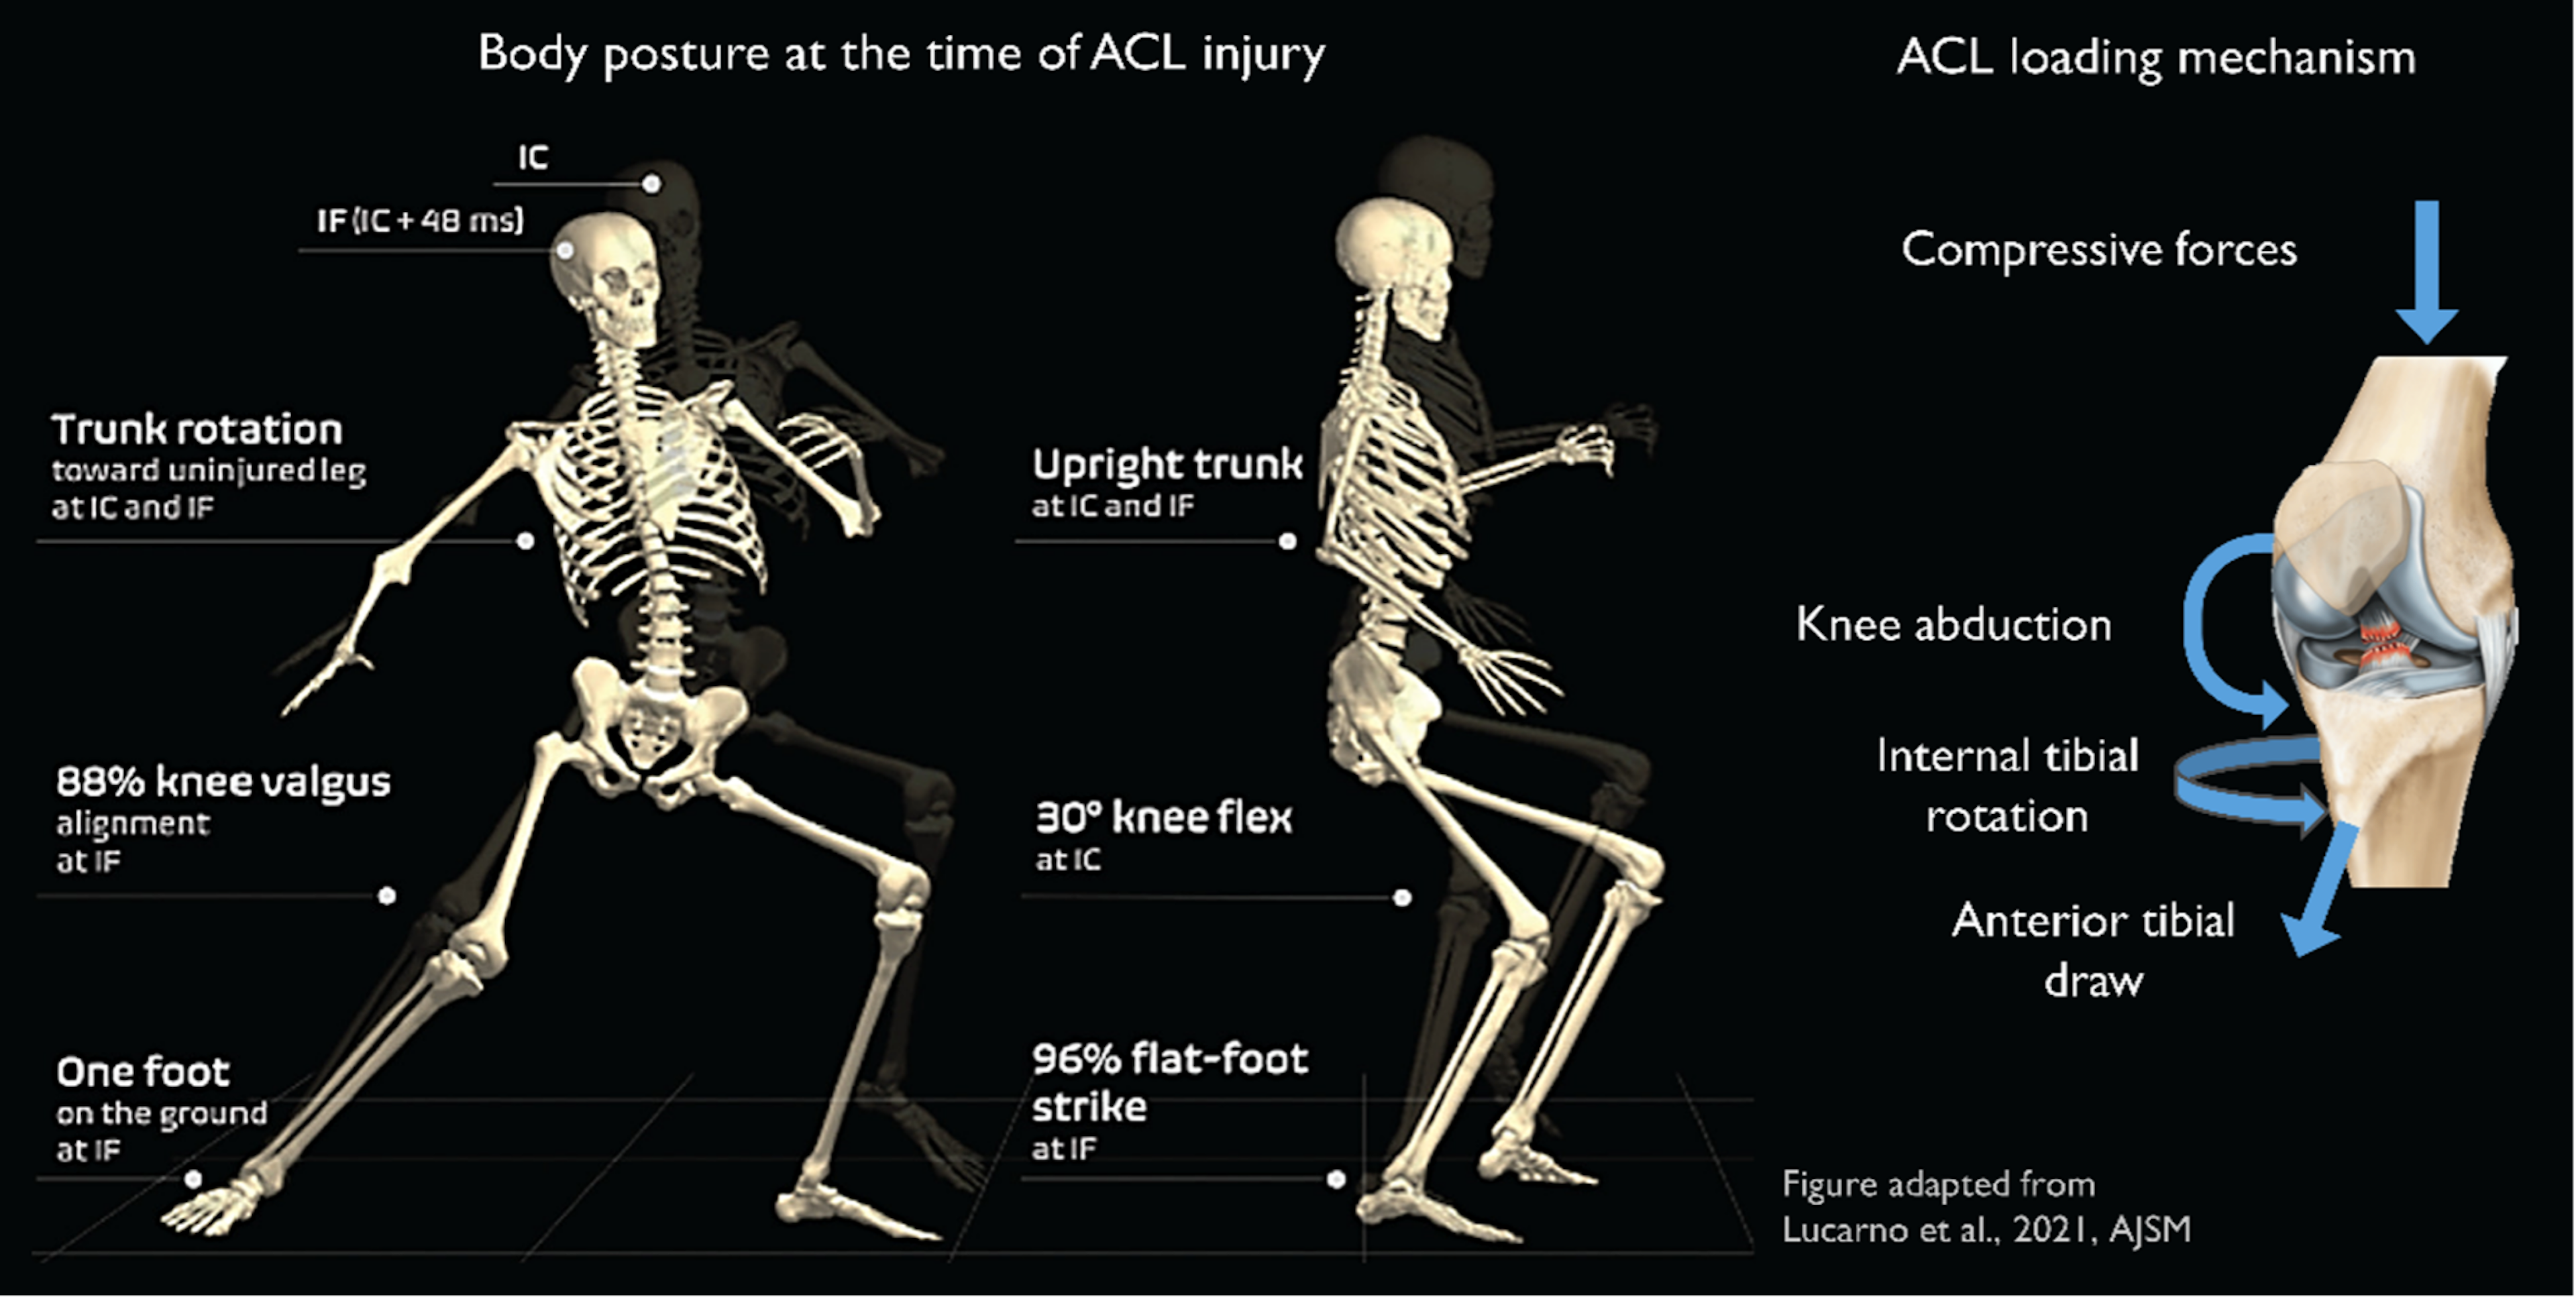 Figure 1. Biomechanical factors contributing to anterior cruciate ligament (ACL) injury. Figure adapted from Lucarno et al 2021.